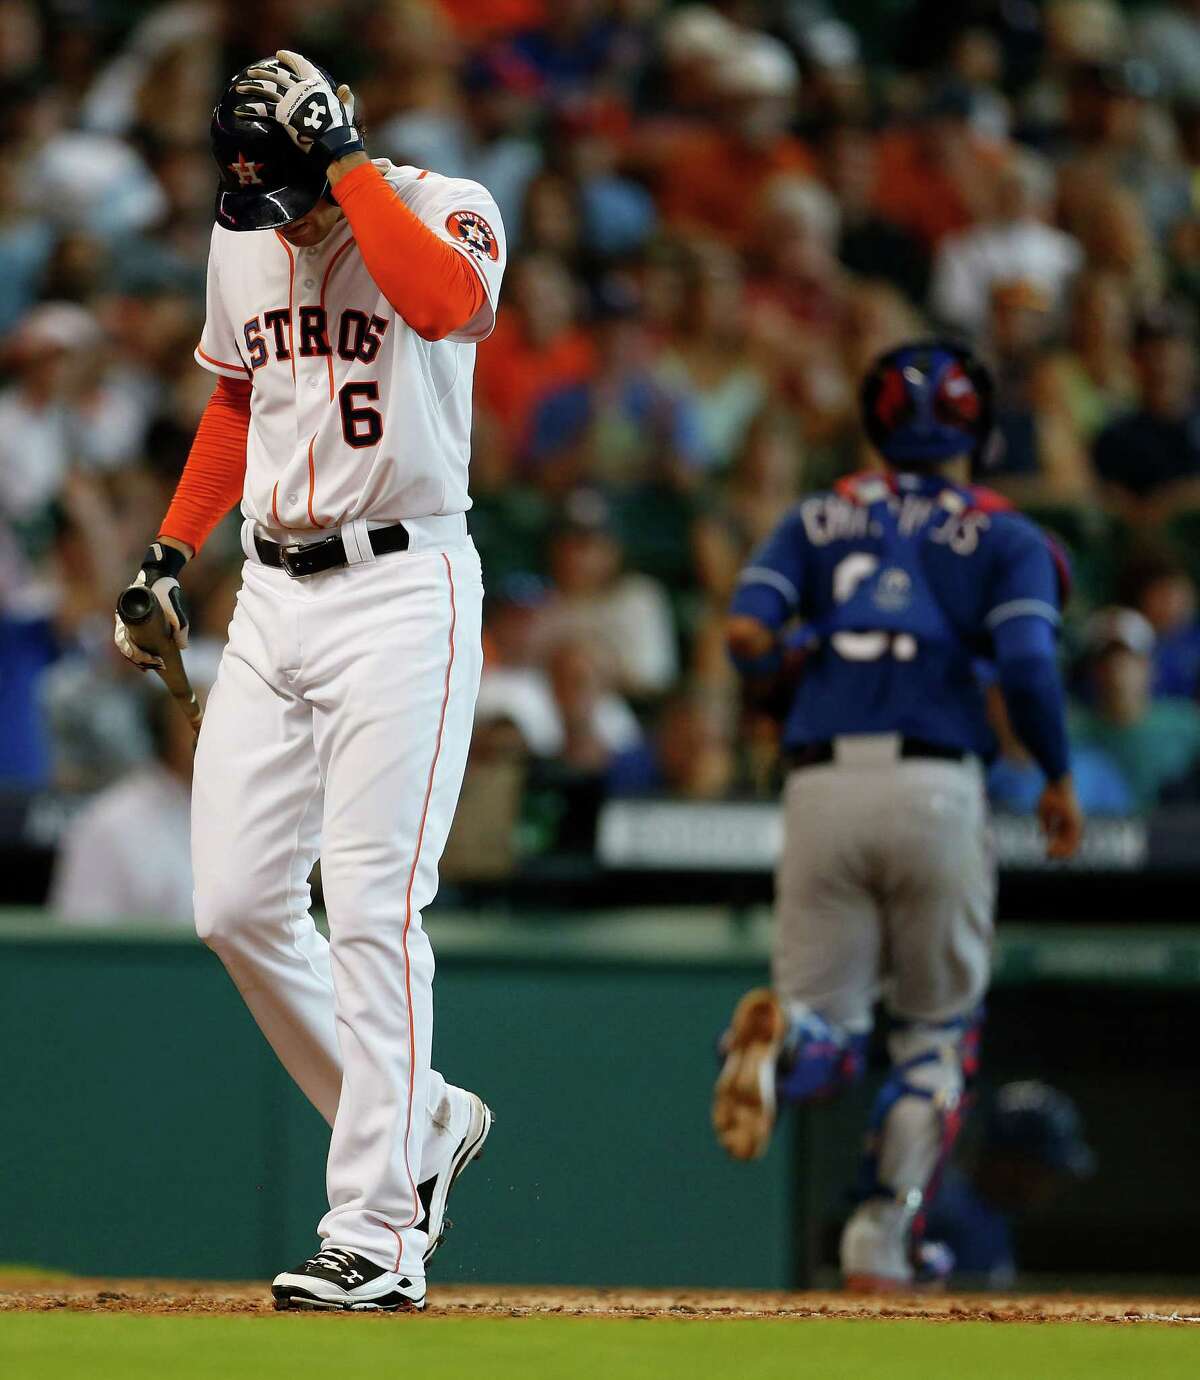 No. 6: Houston  Most recent heartbreak:  The Houston Astros finished 2013 with MLB's worst regular season record of 51-111, while the Houston Texans took the NFL's bottom spot after a stomach-turning 2-14 season. To add salt to the baseball wound, the Astros failed to sign their No. 1 overall draft pick.